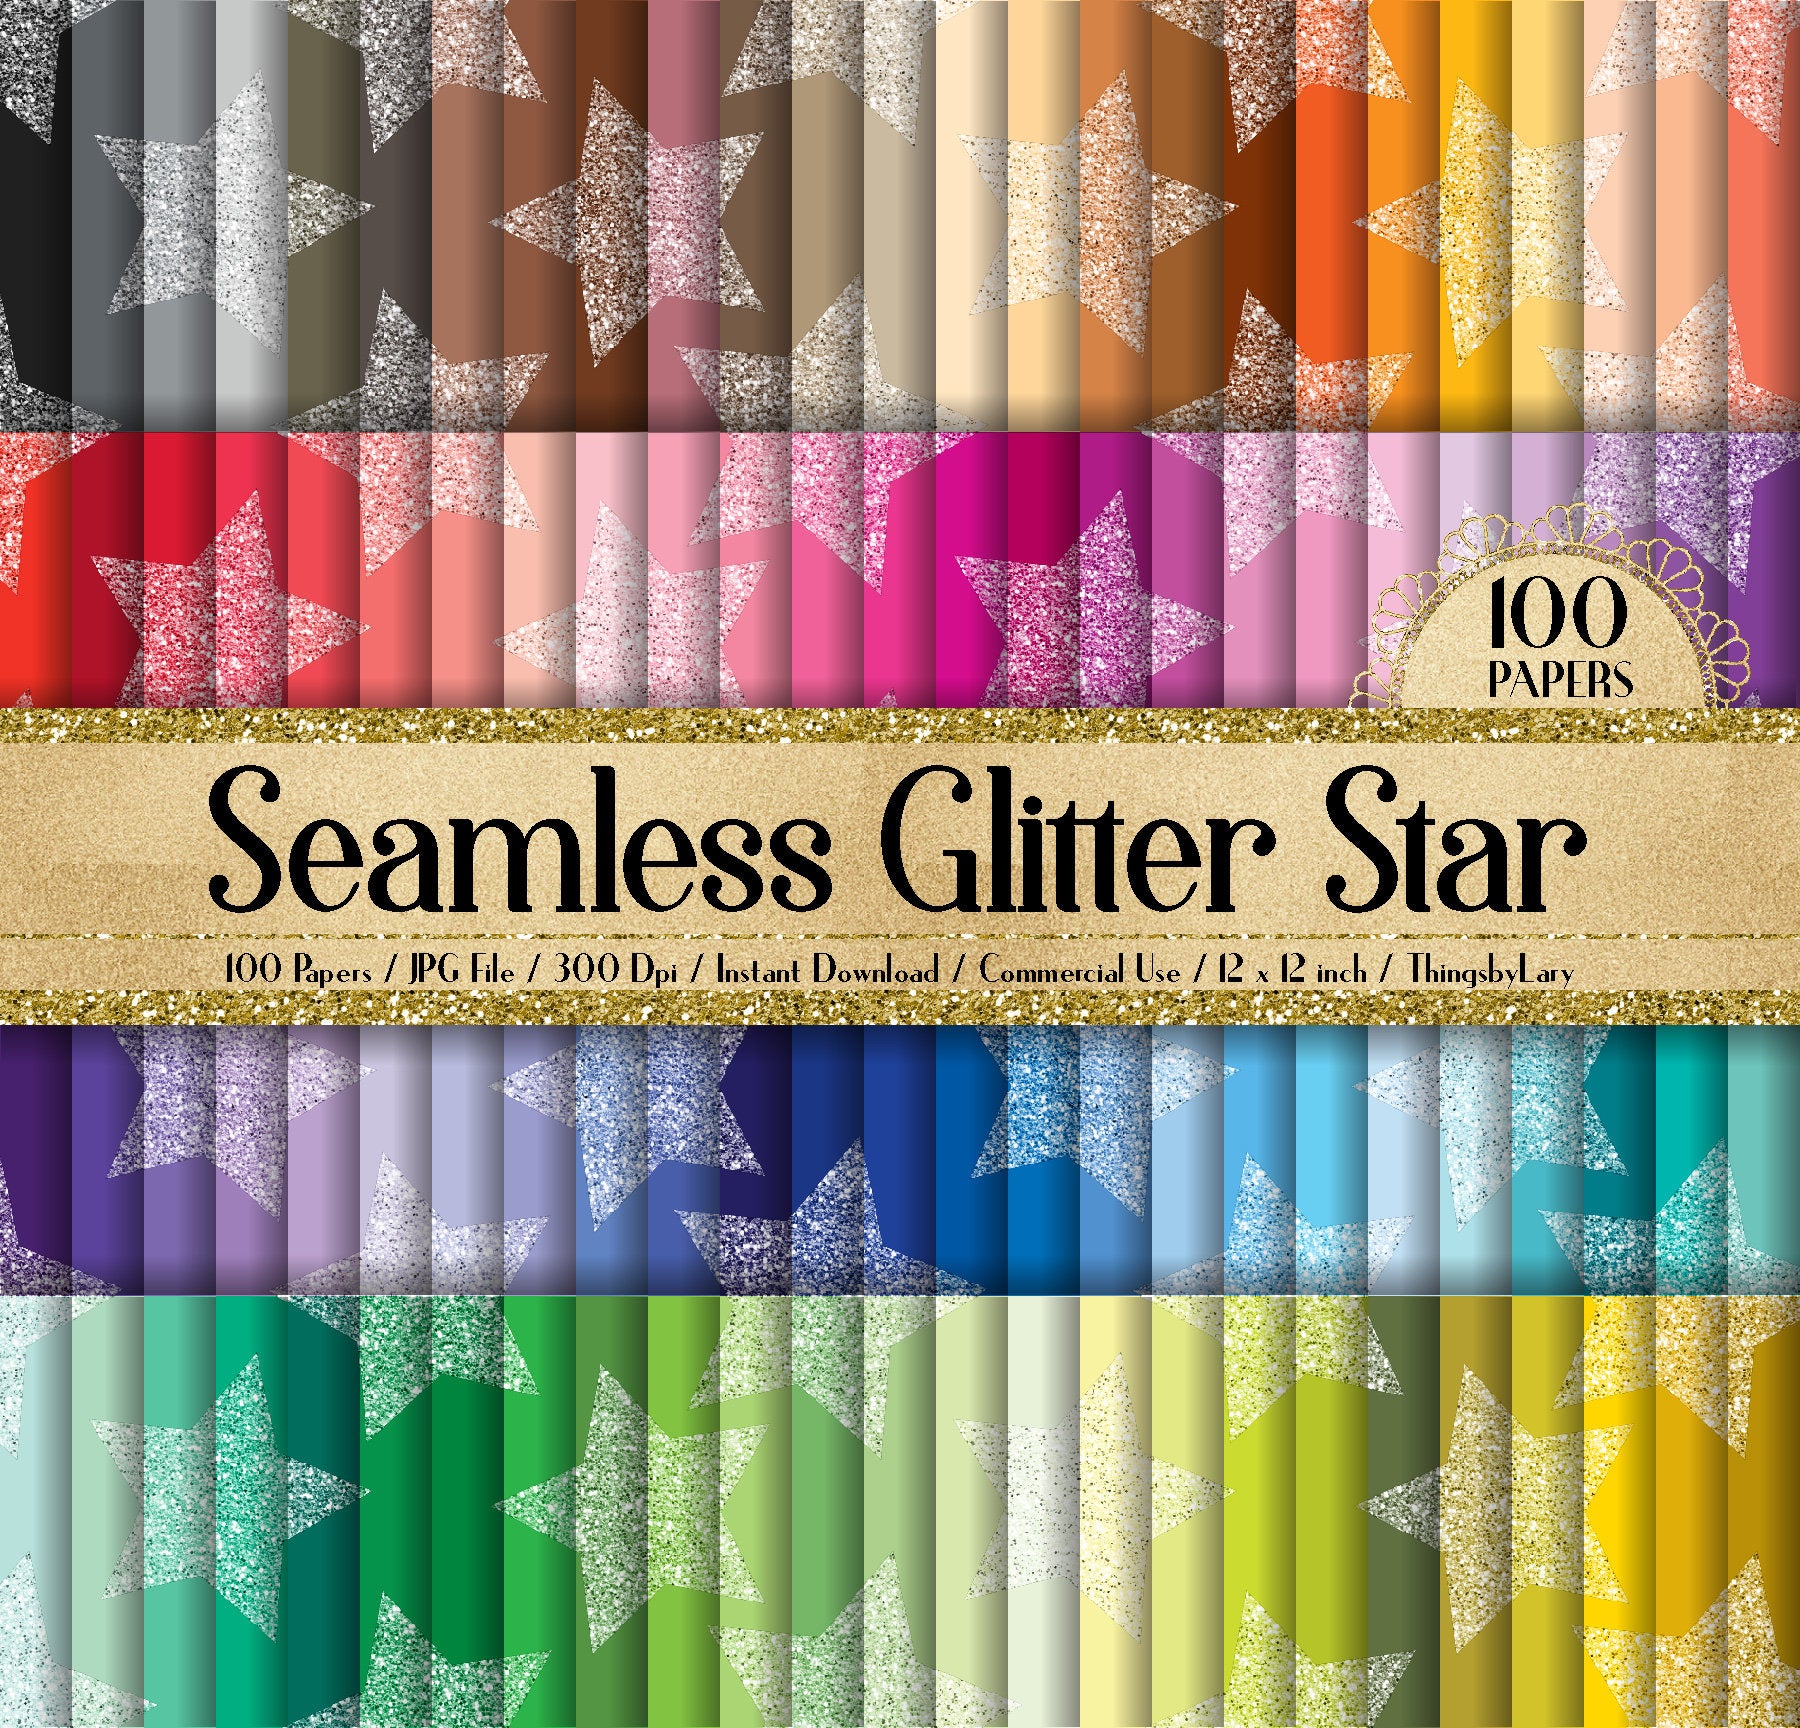 100 Seamless Glitter Star Digital Papers 12inch 300 Dpi Planner Paper Instant Download Commercial Use, Scrapbook Paper Seamless Gold Glitter